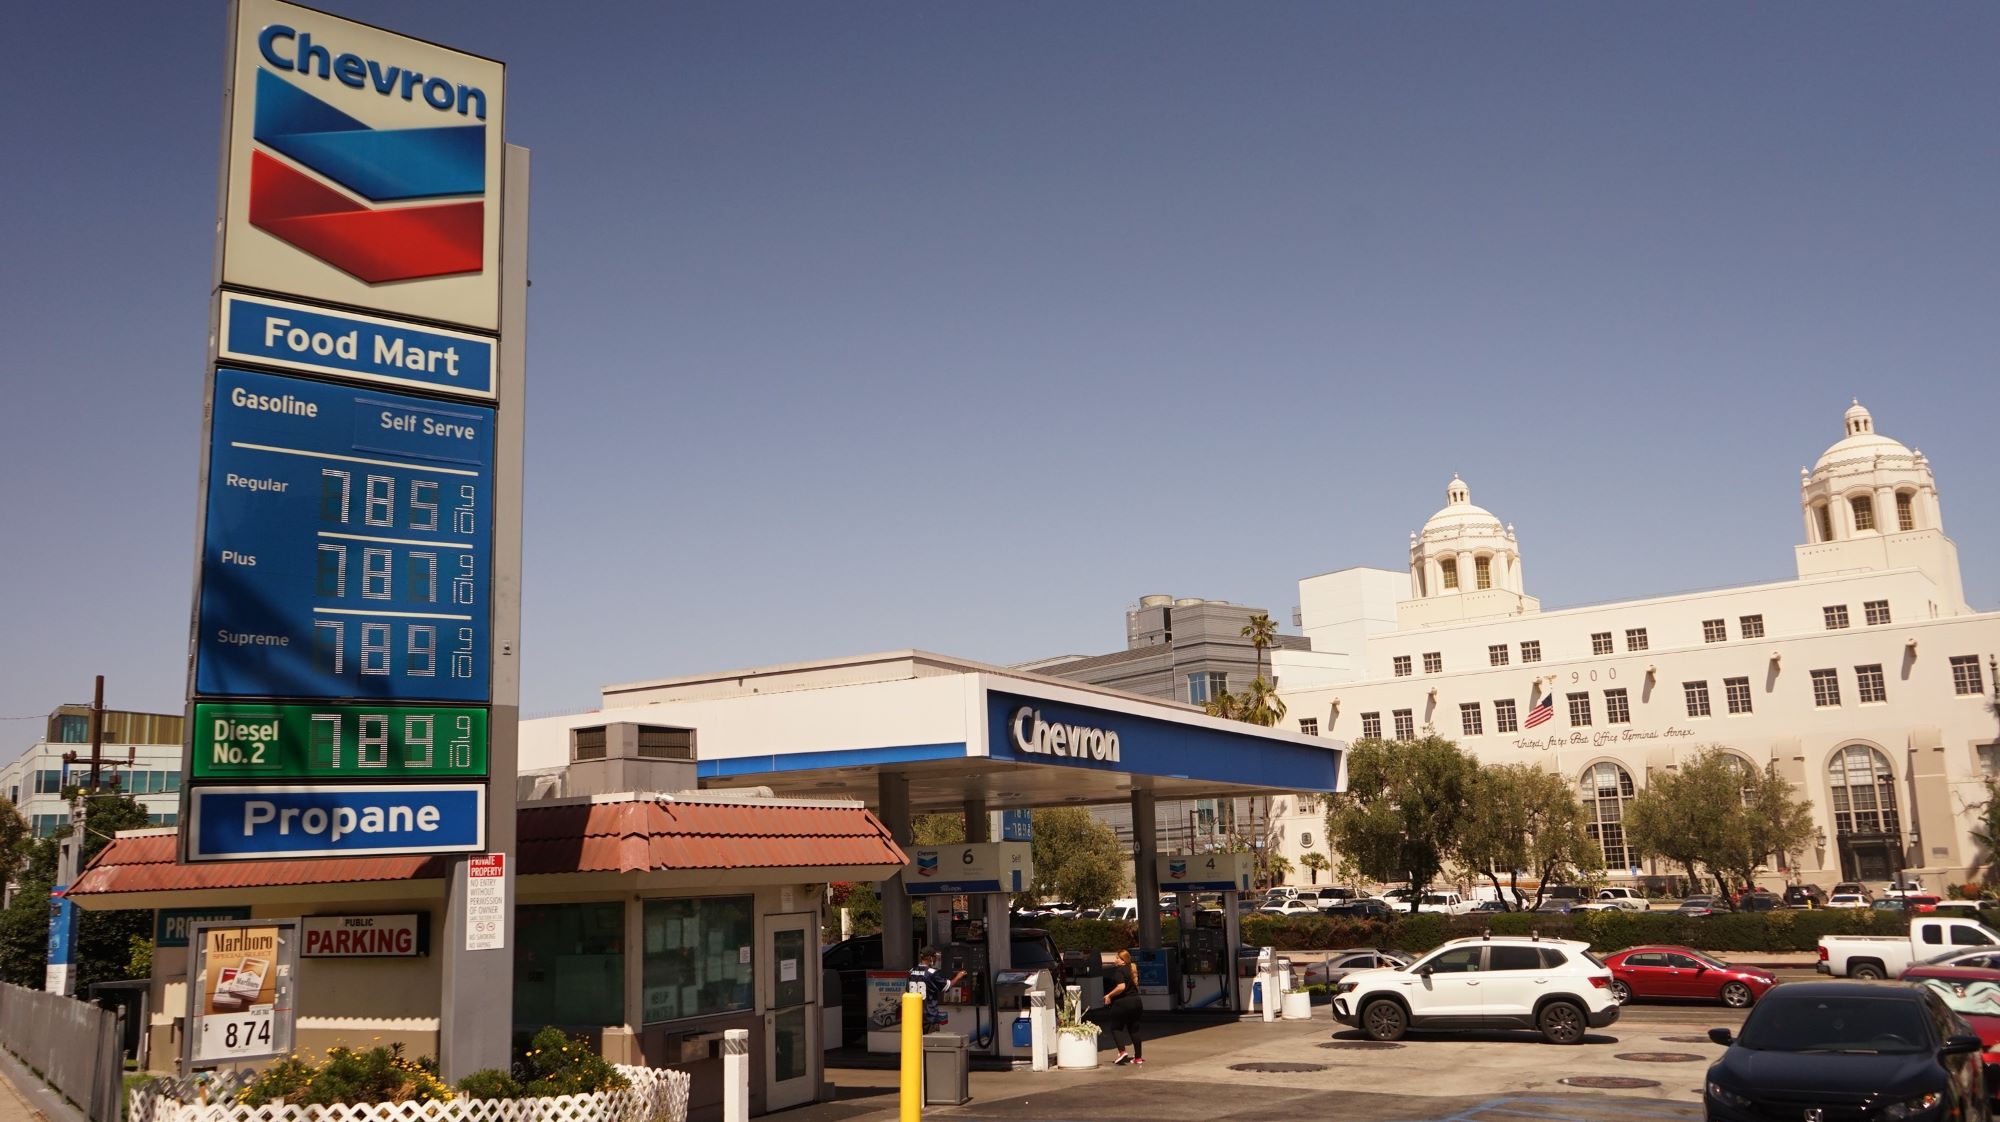 Gas prices over $7 at a Chevron gas station in California.